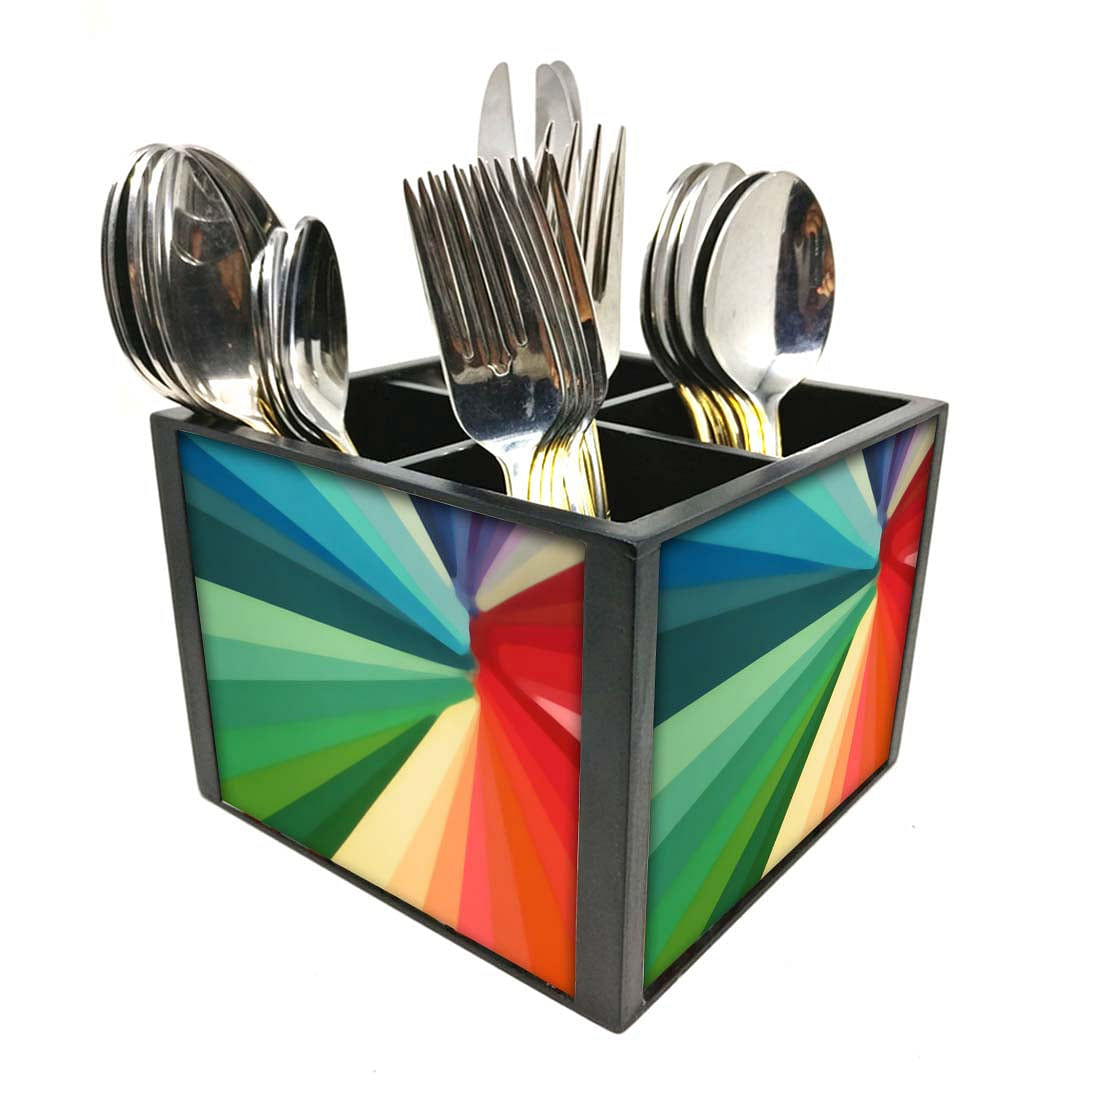 Multicolor Strips Cutlery Holder Stand Silverware Caddy Organizer for Spoons, Forks & Knives-Made of Pinewood Nutcase